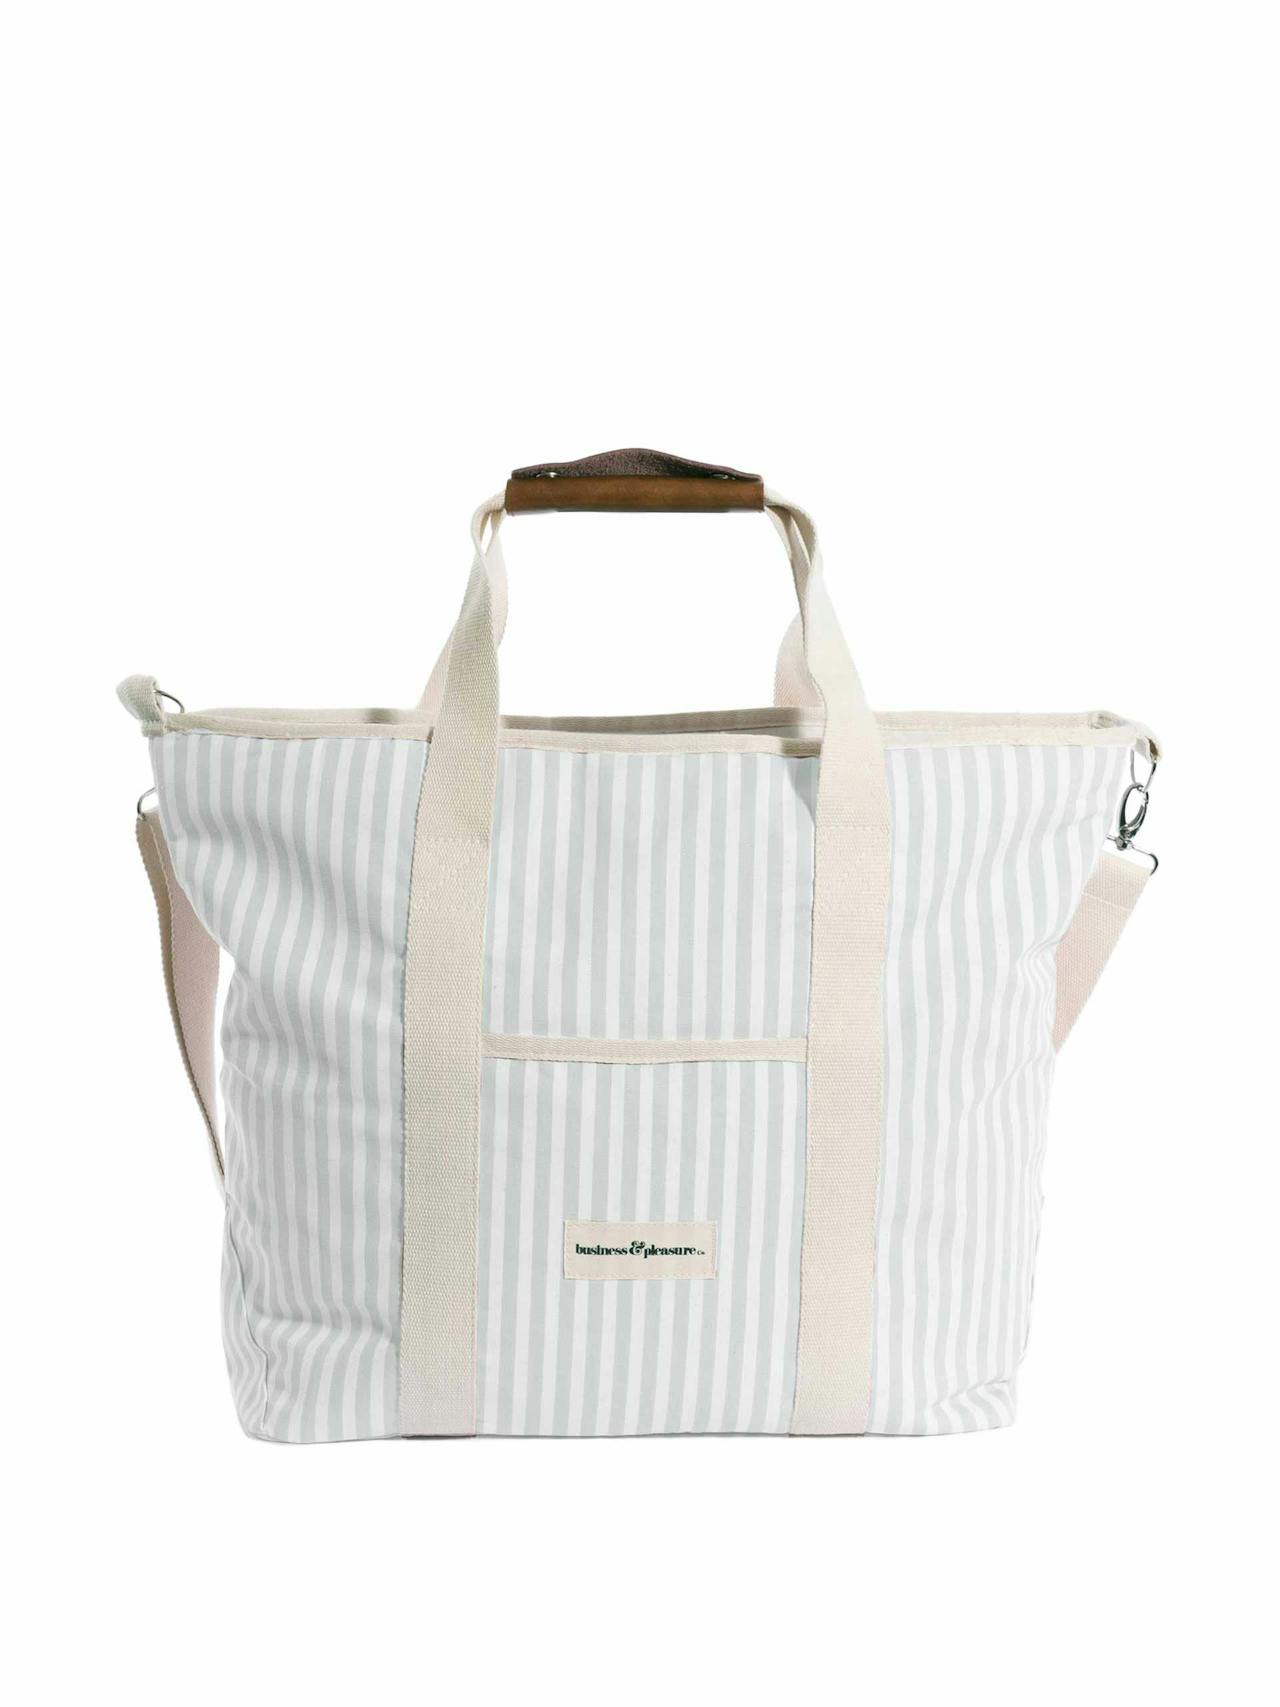 Blue and white striped tote cooler bag